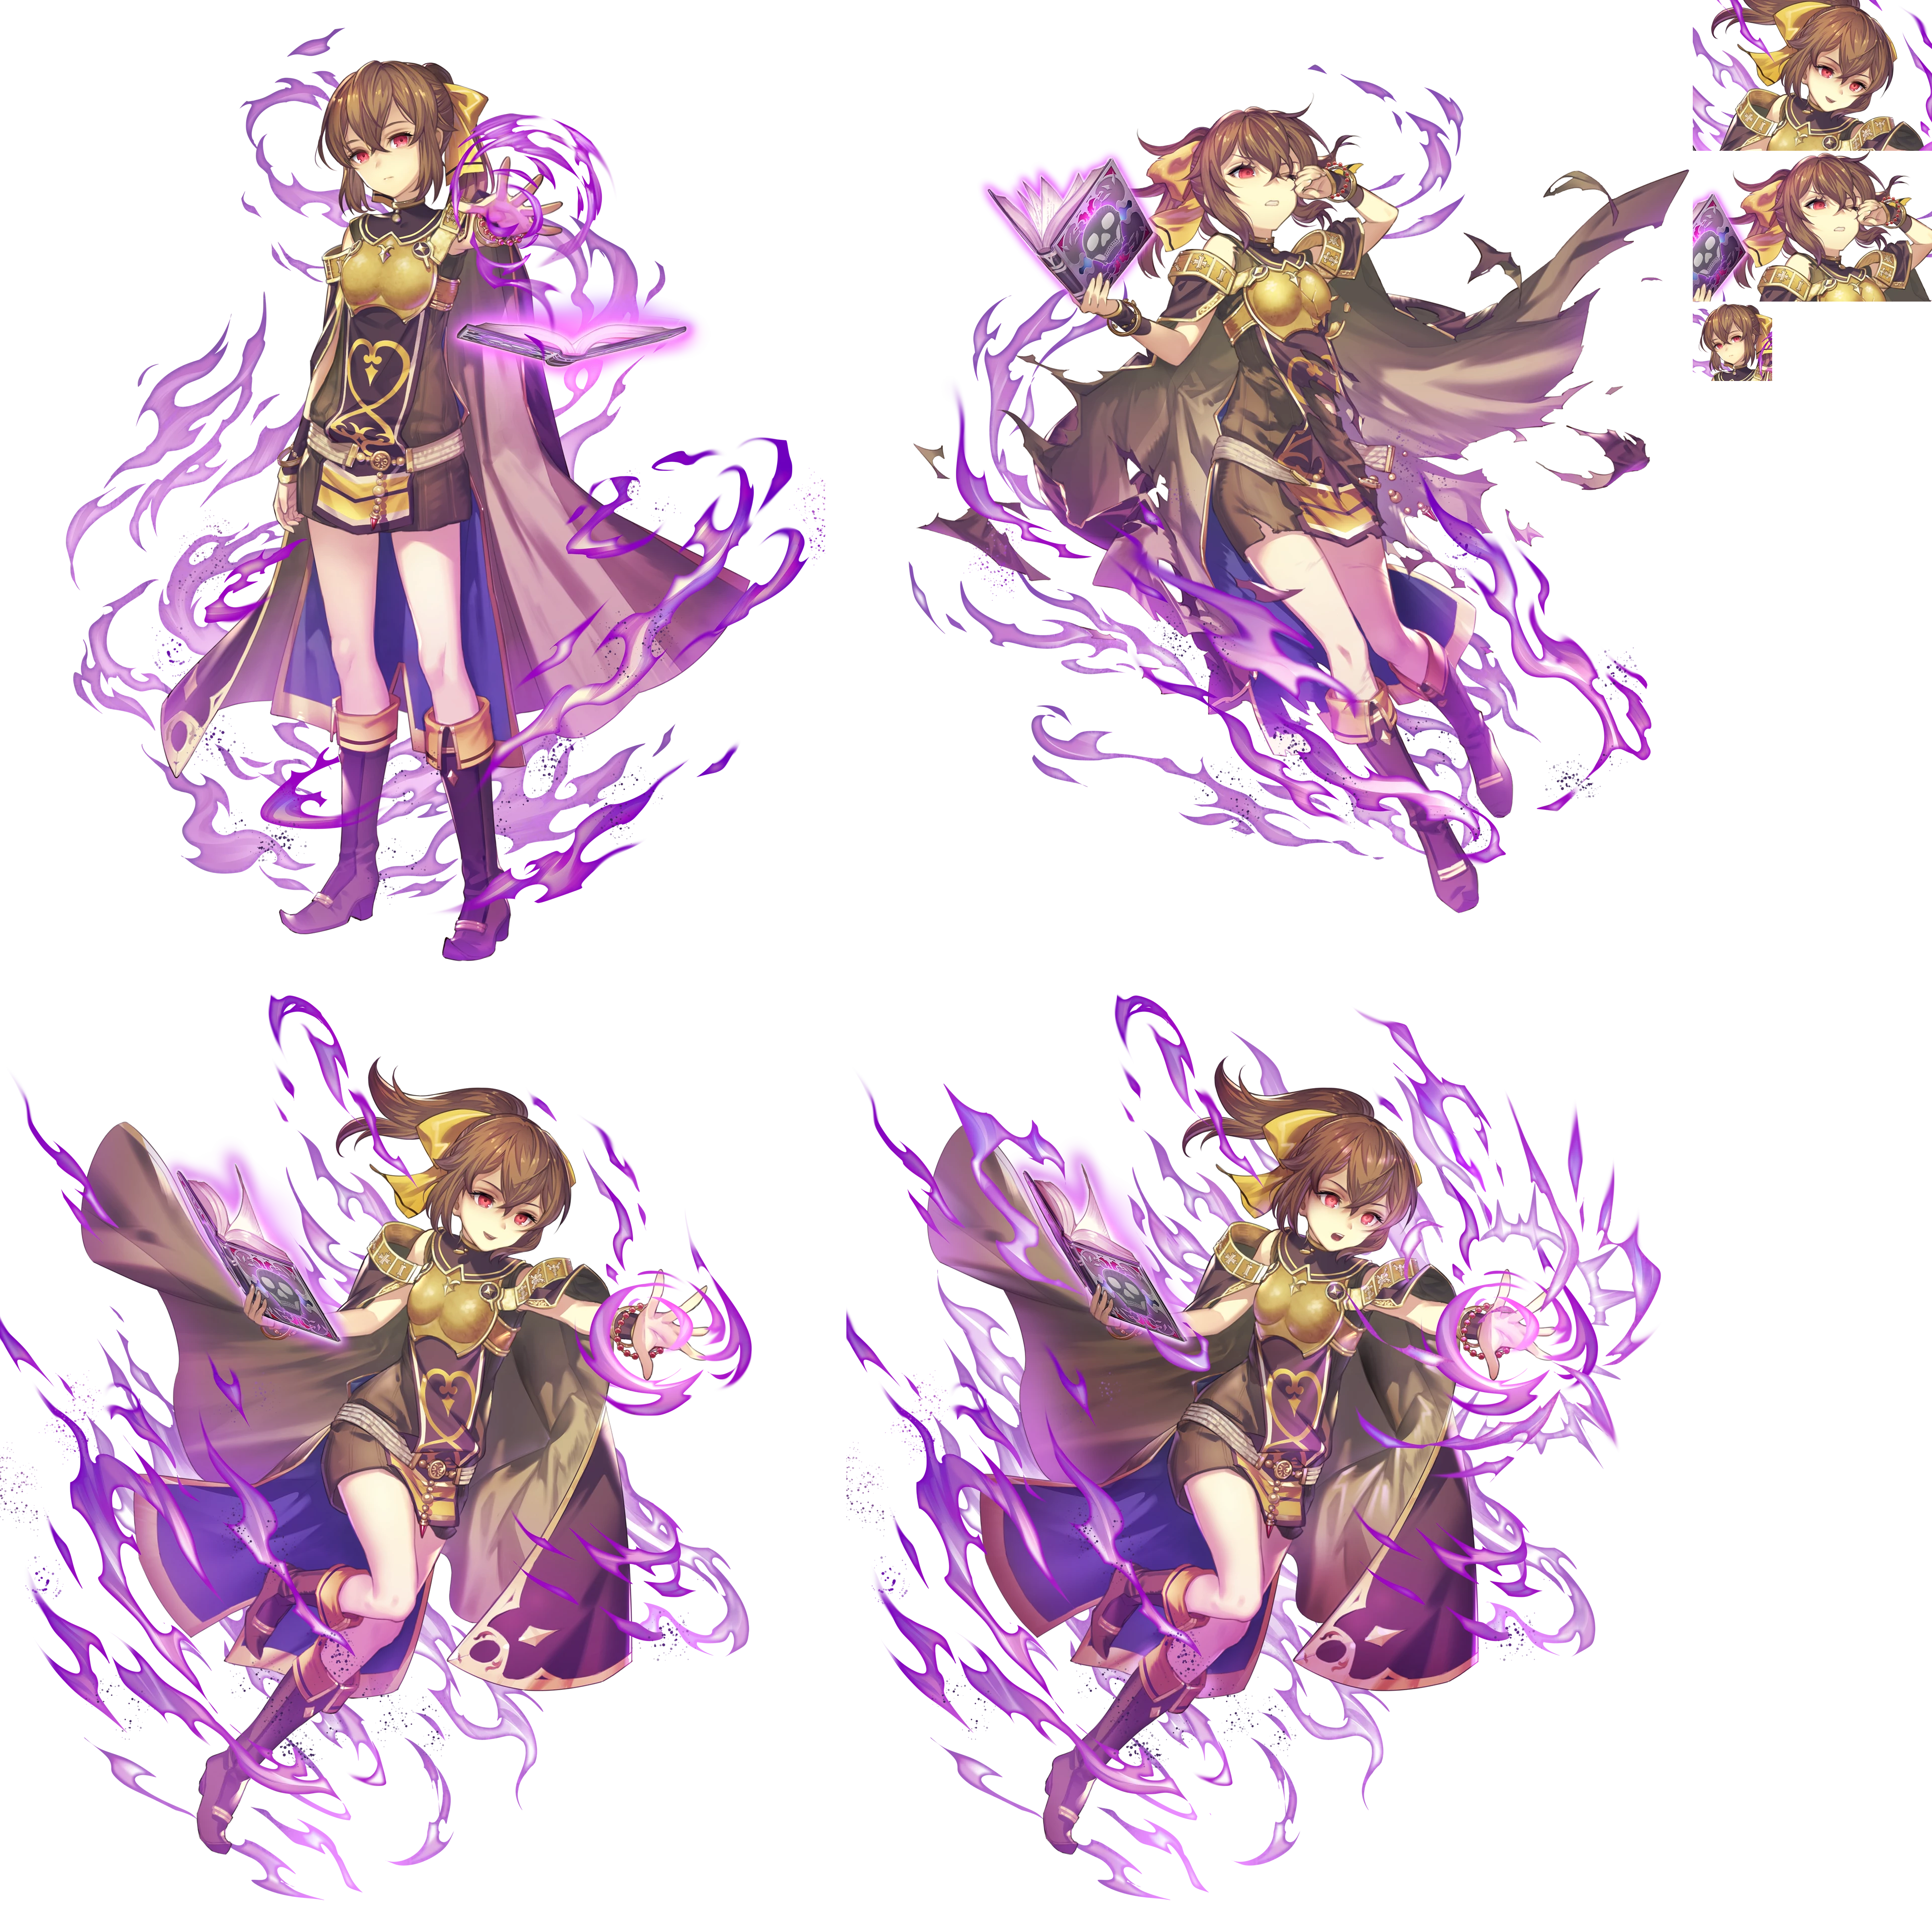 Delthea (Darkness Within)